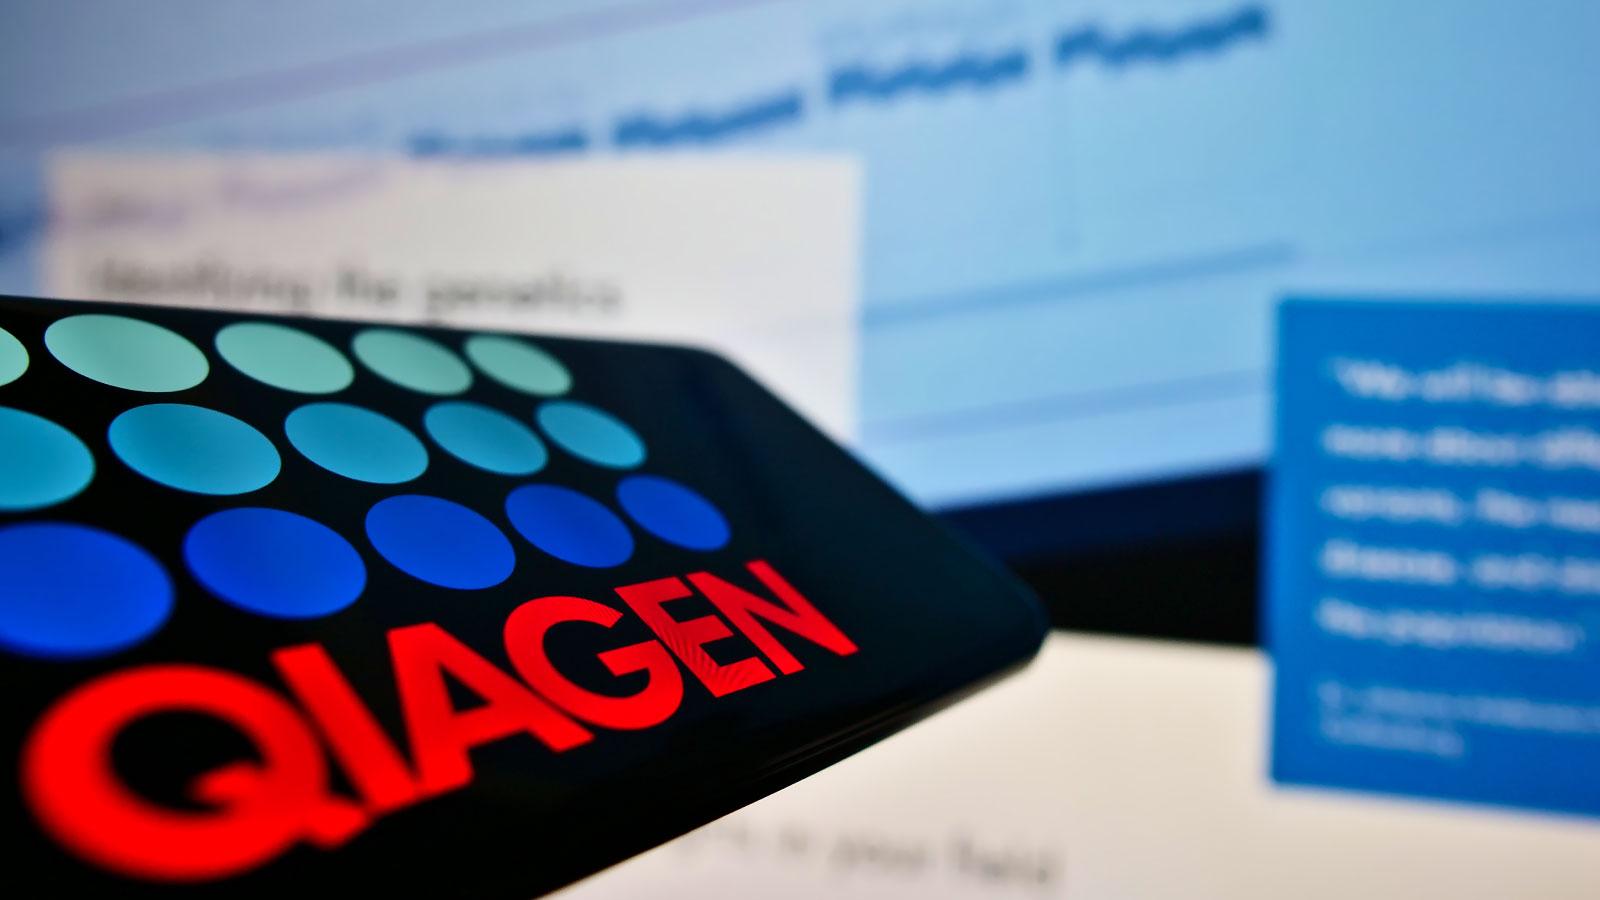 Product JADBio Announces Global Distribution Agreement with QIAGEN Digital Insights for advanced AI and Machine learning analytics image